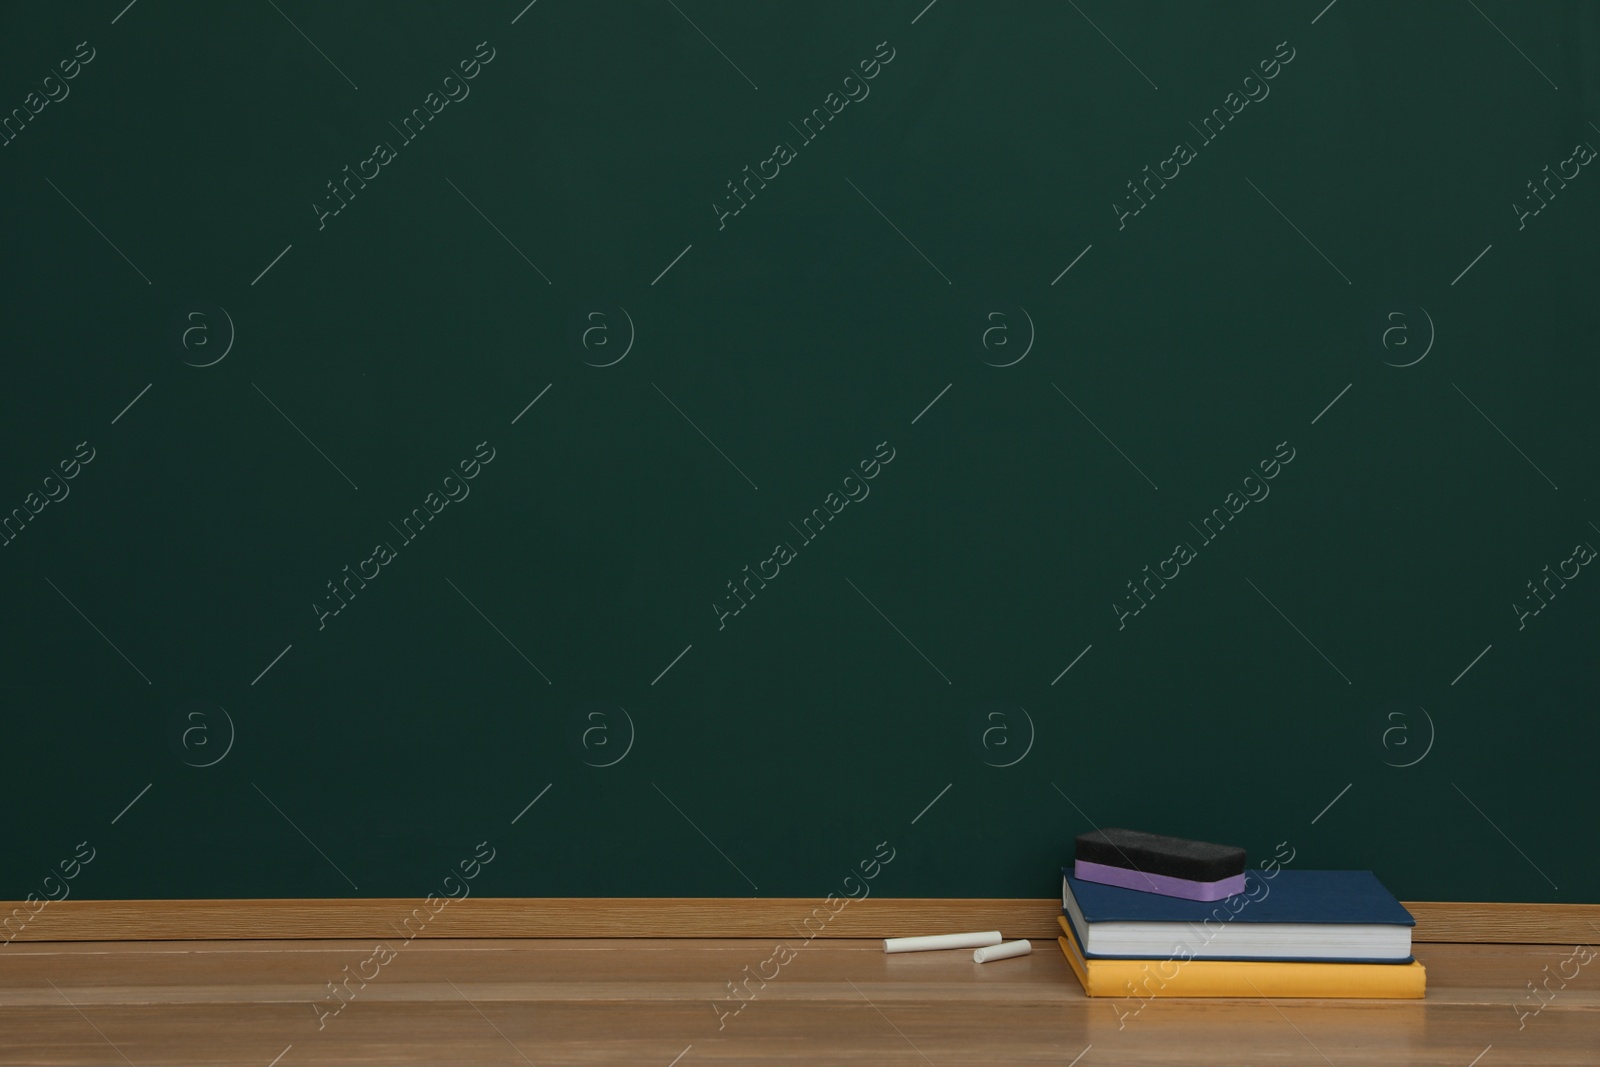 Photo of Books, pieces of chalk and duster on wooden table near greenboard, space for text